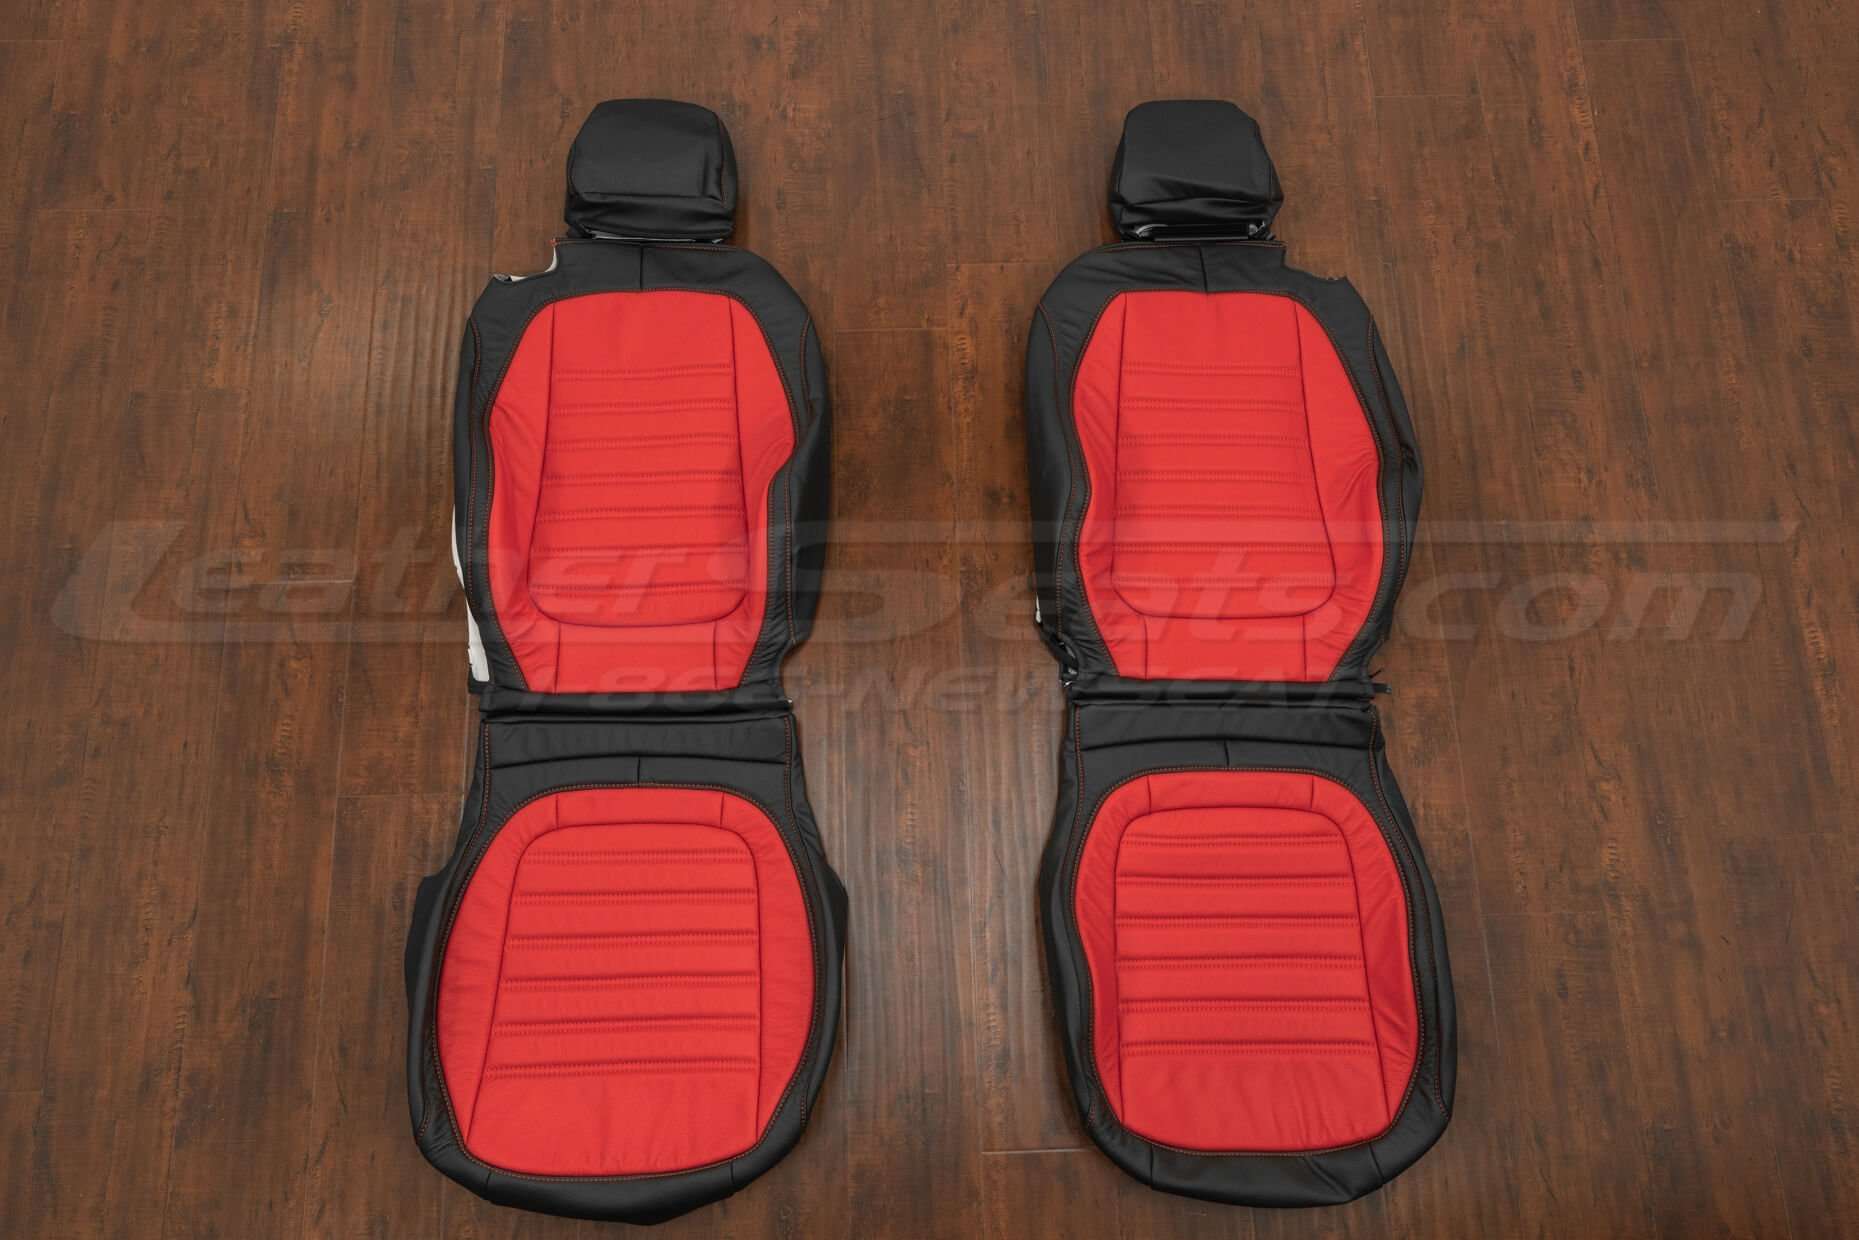 Volkswagen Beetle Leather Kit - Black & Bright Red -Front seat upholstery